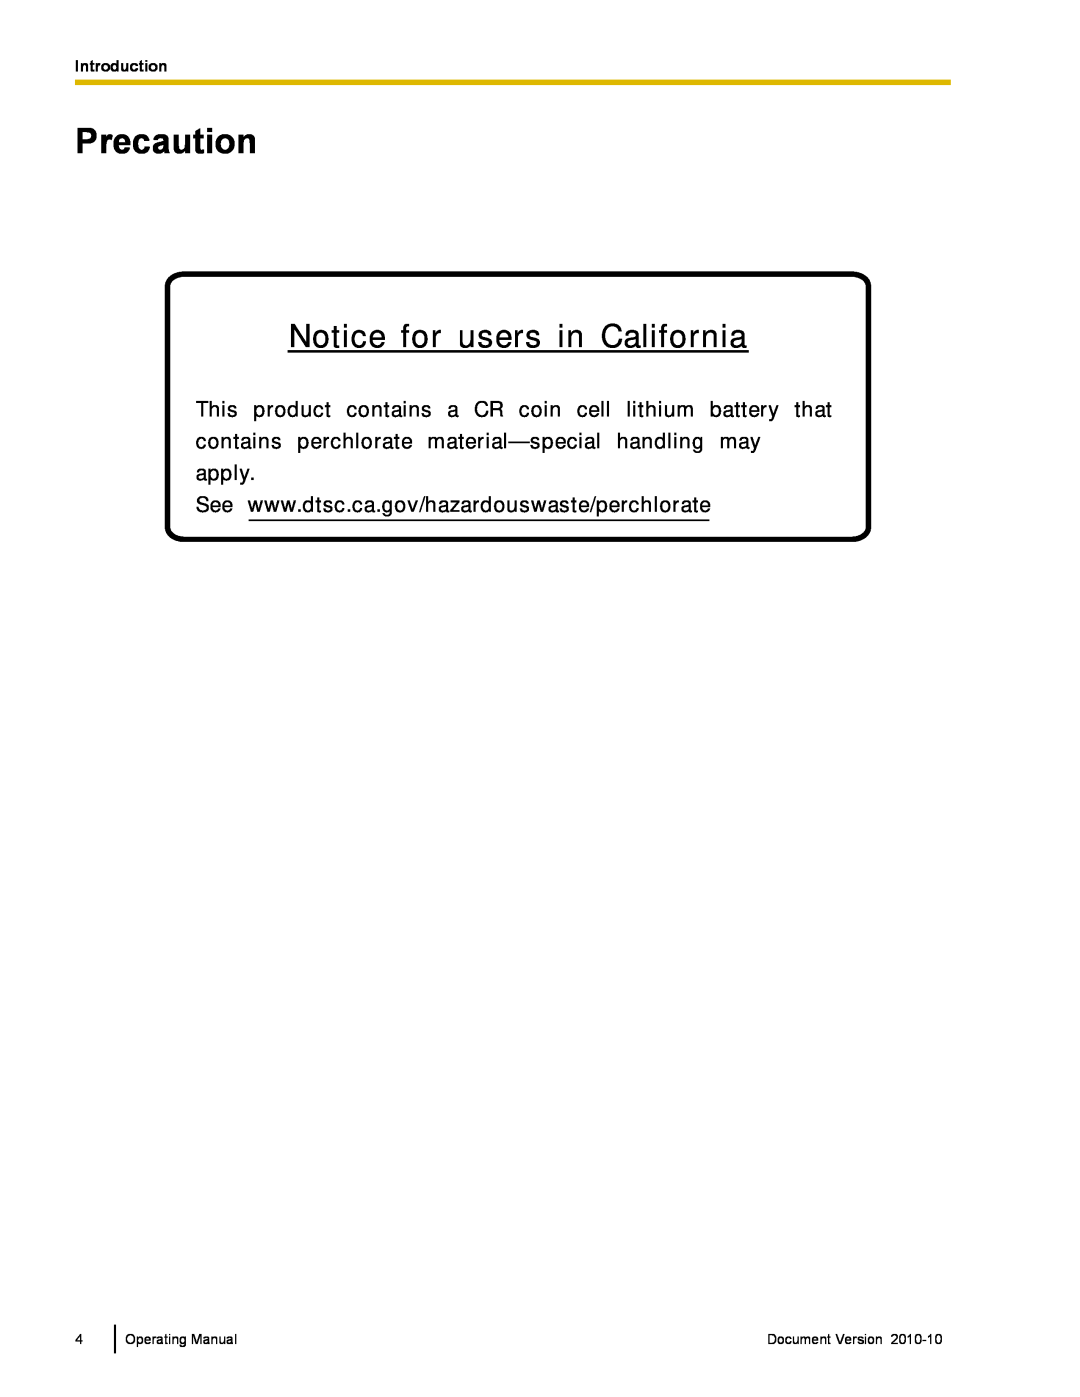 Panasonic KX-VC500 Precaution, Notice for users in California, contains perchlorate material—specialhandling may, apply 